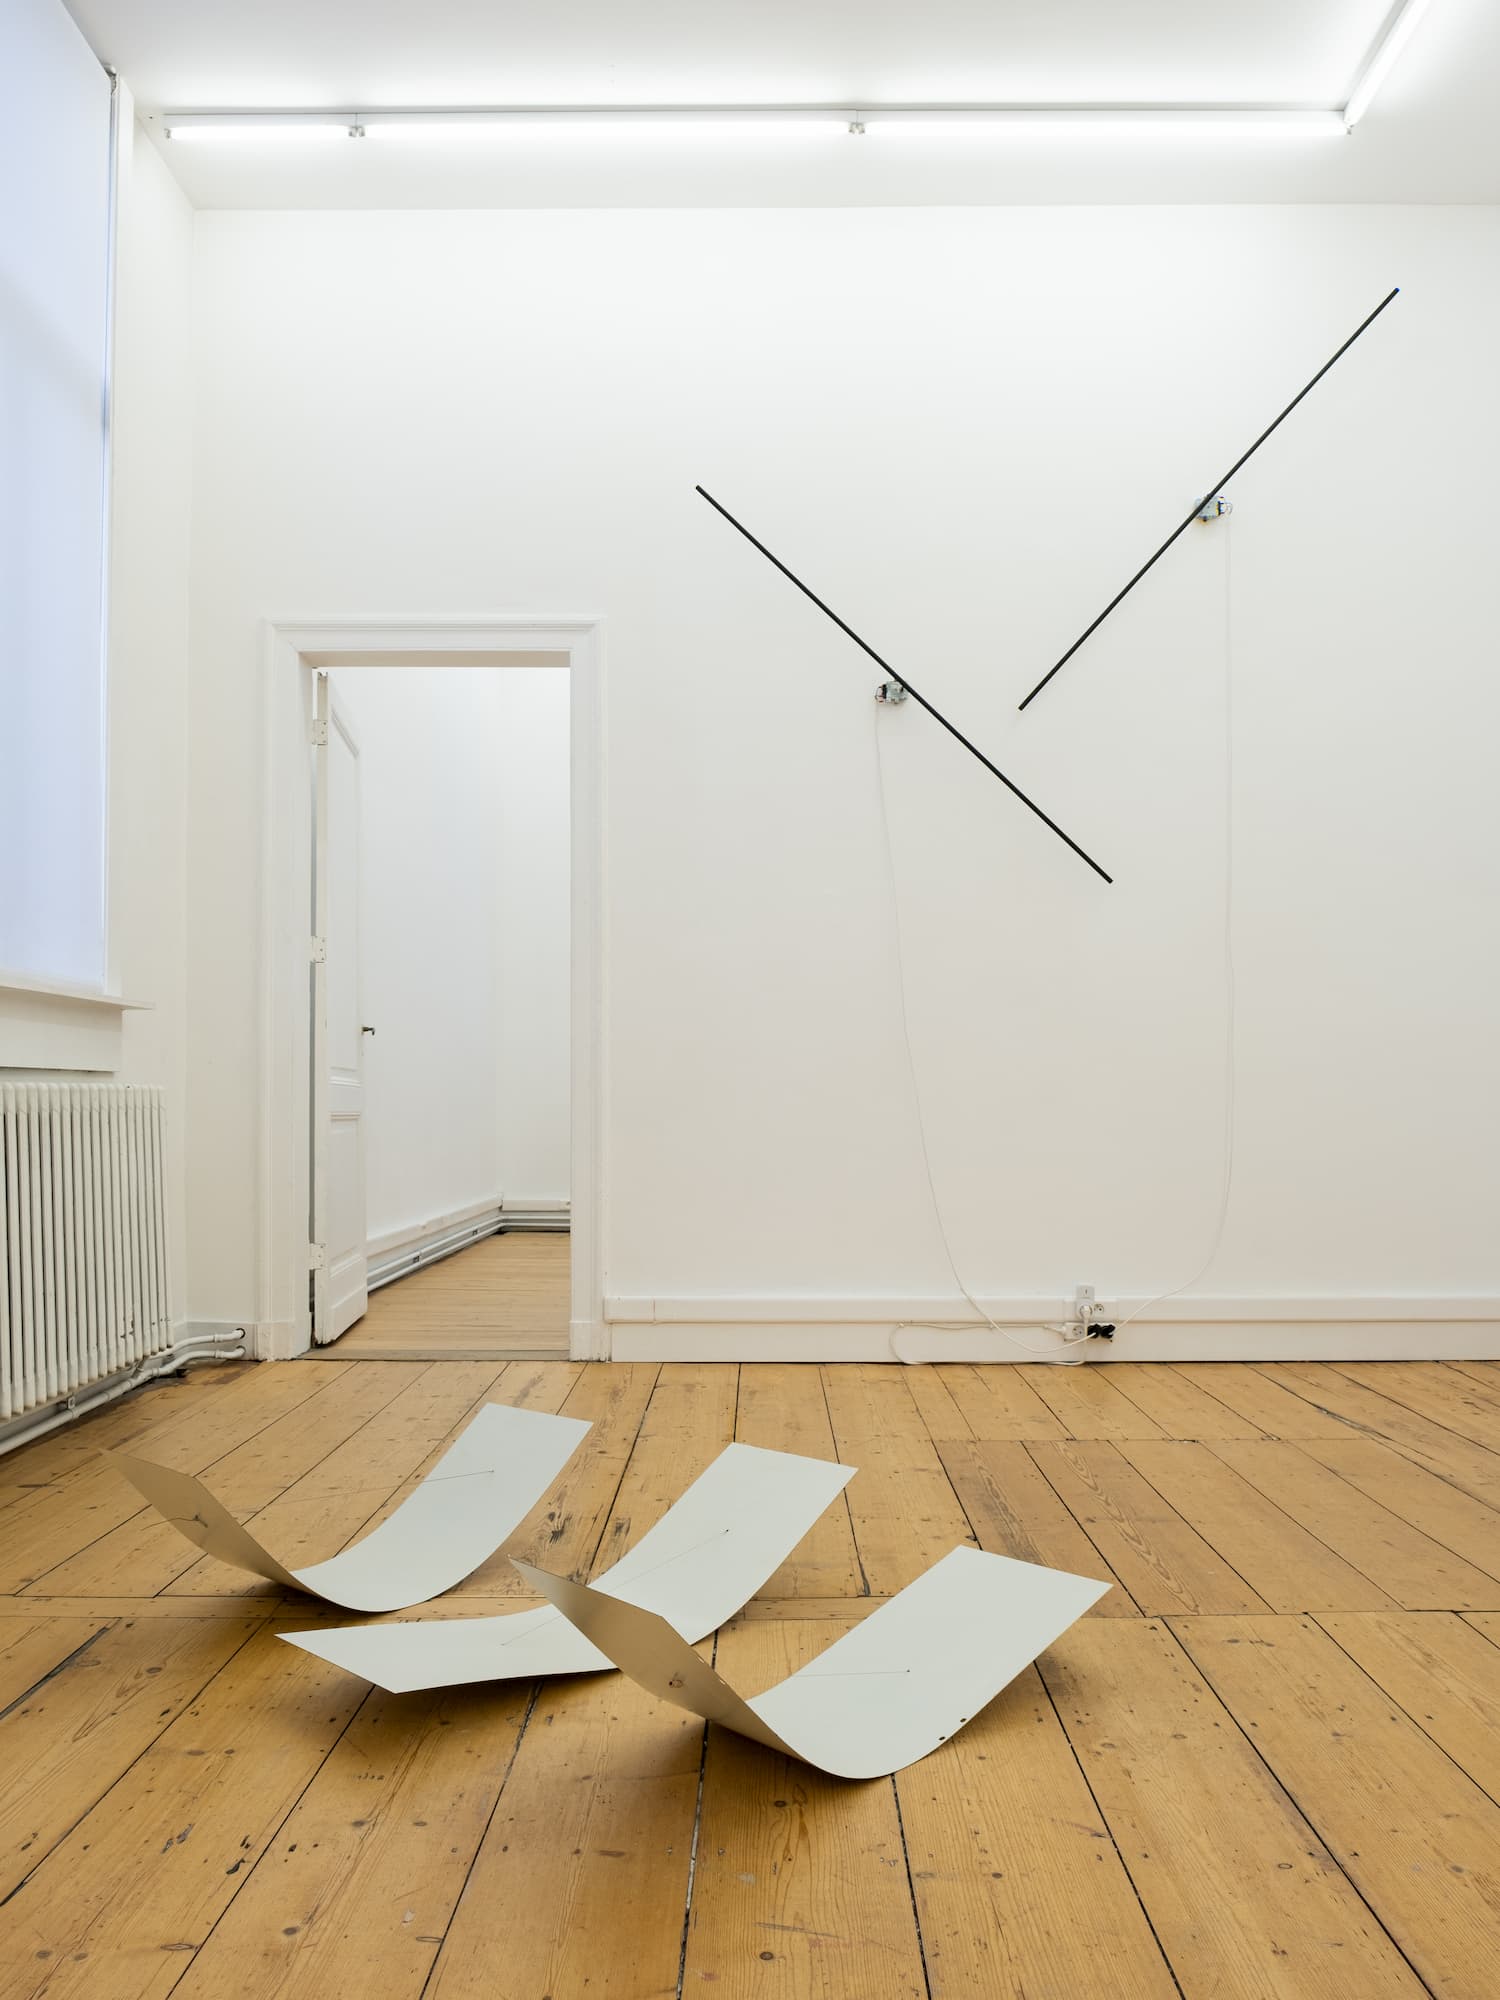 Pipes Mounted on a Wall and New Kind of Musical Instruments on the Floor | by Anna Godzina.